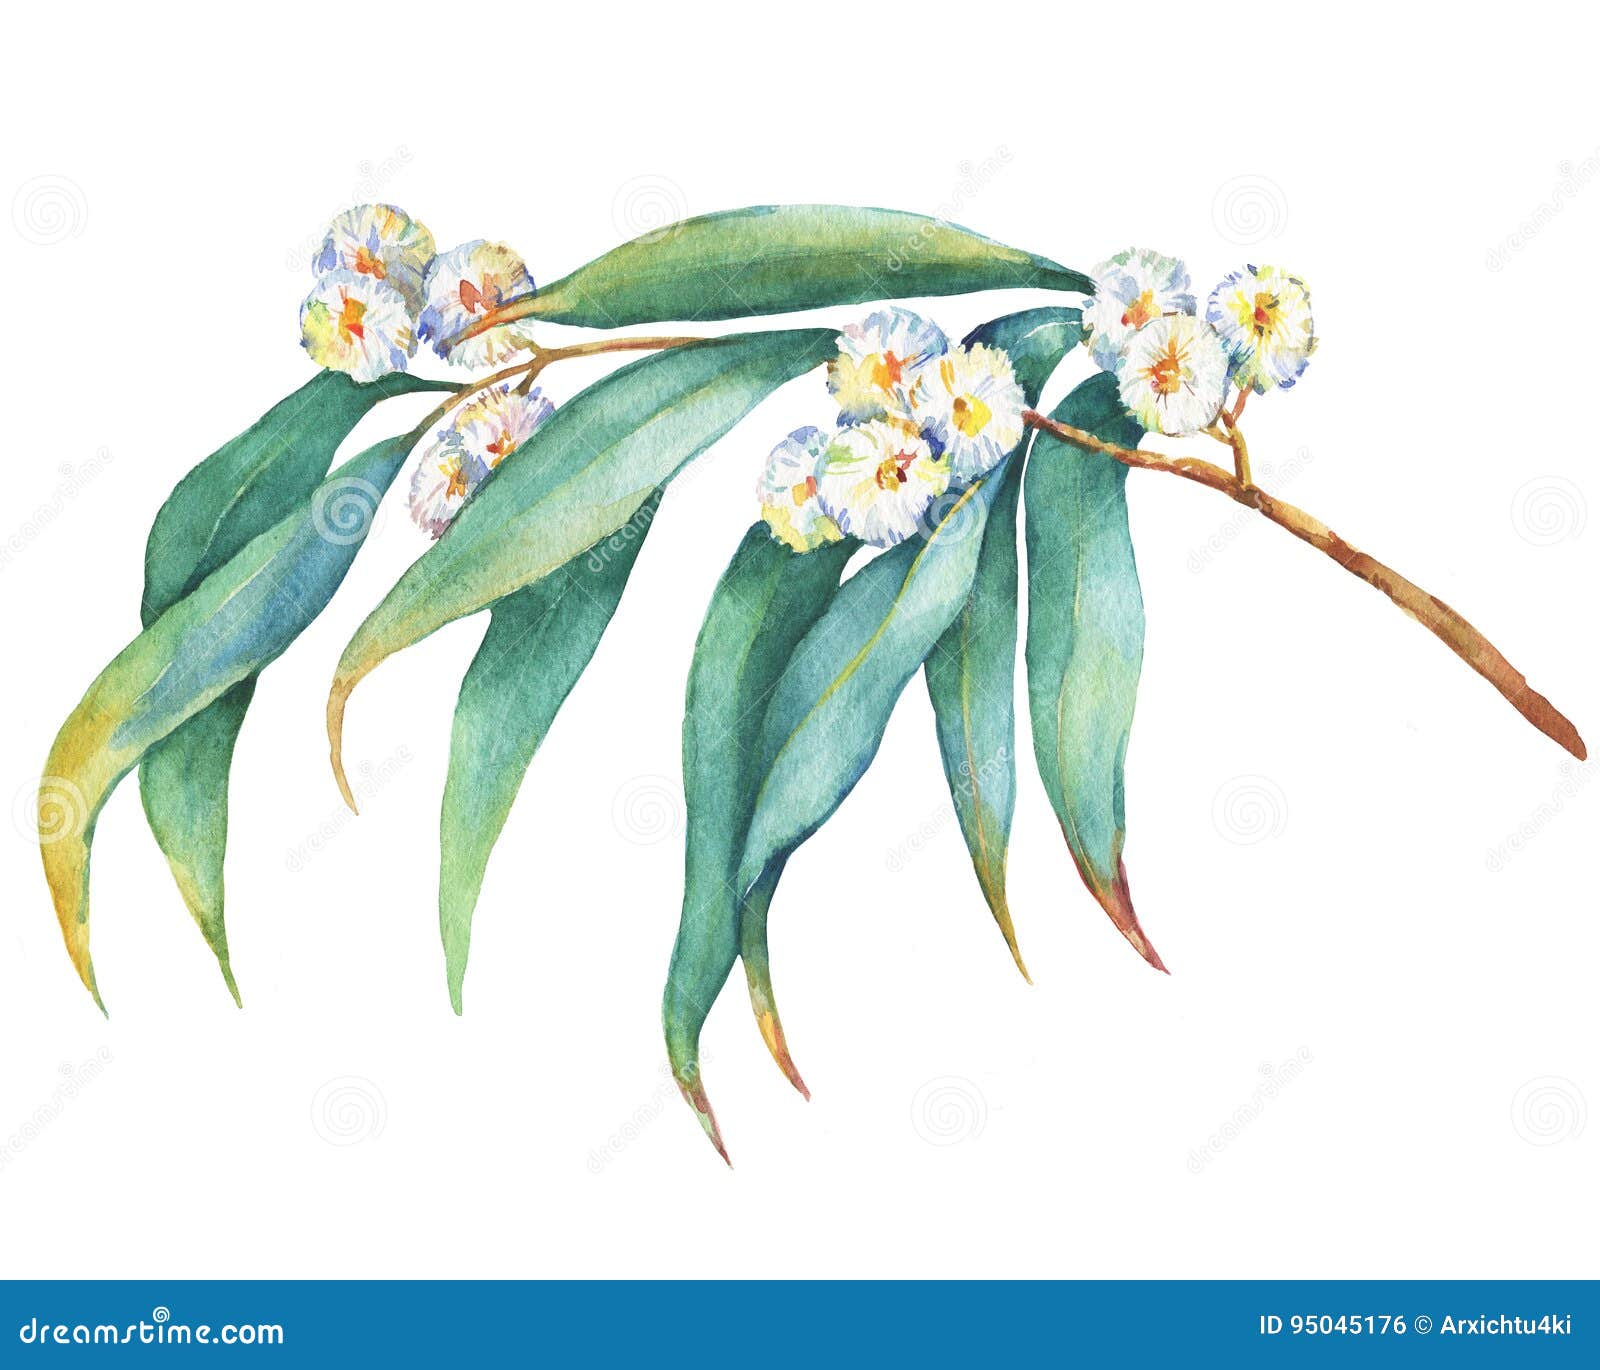 a branch of eucalyptus melliodora flowers, plant also known as yellow box gum.